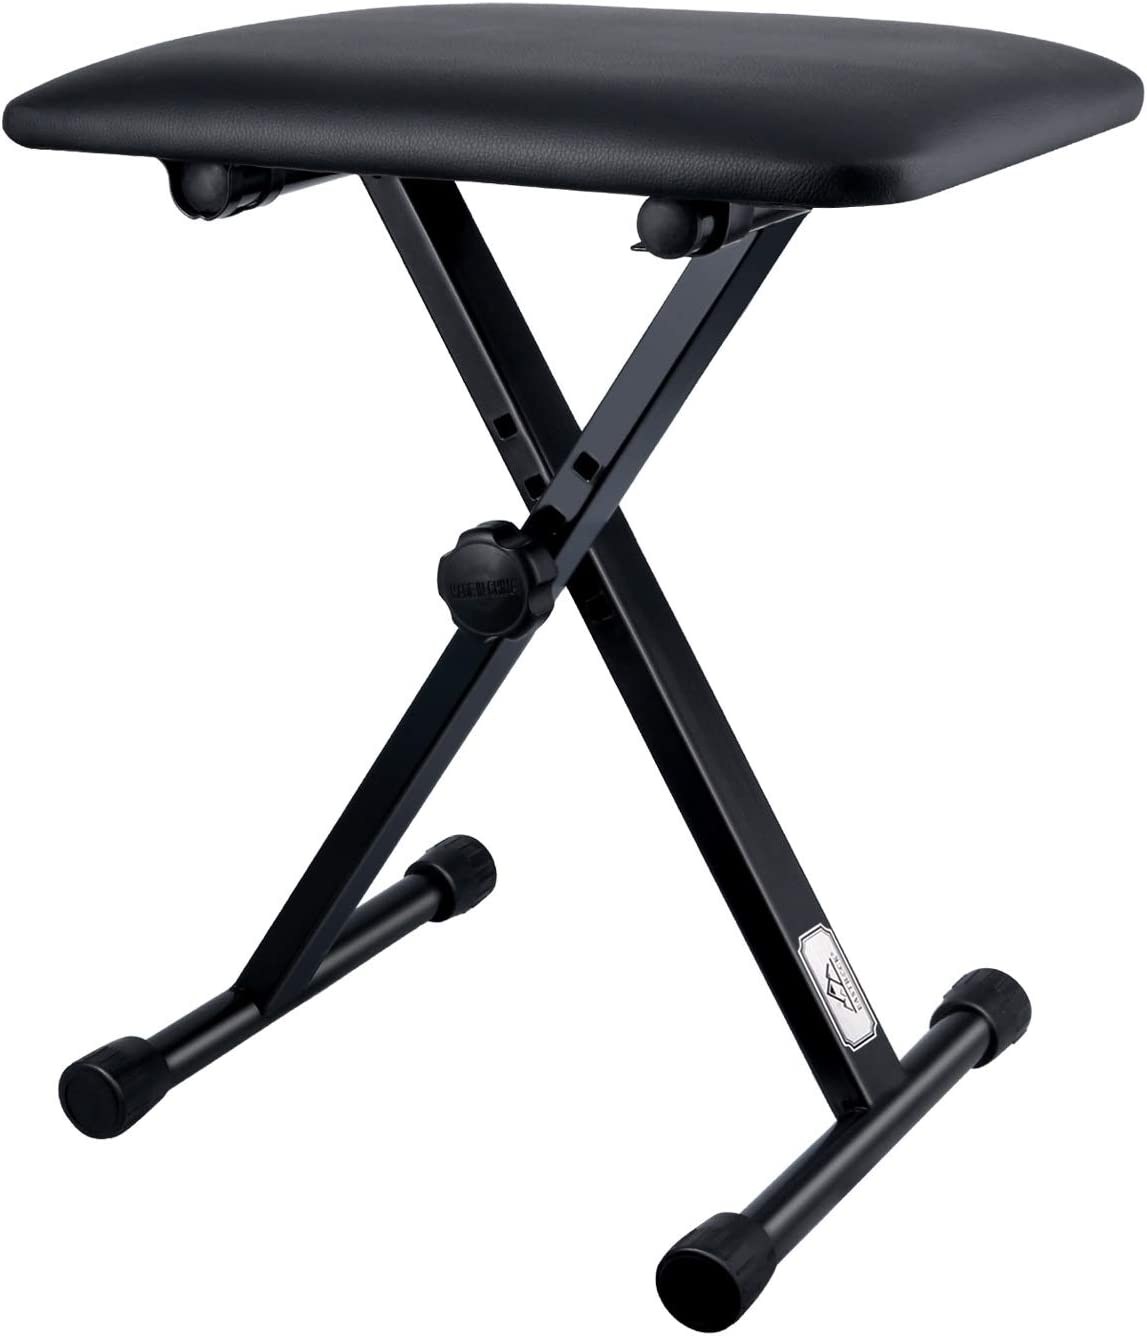 Eastrock Adjustable Piano Keyboard Bench X-Style Stool Chair Seat for Electronic Keyboards & Digital Pianos Additional Version 